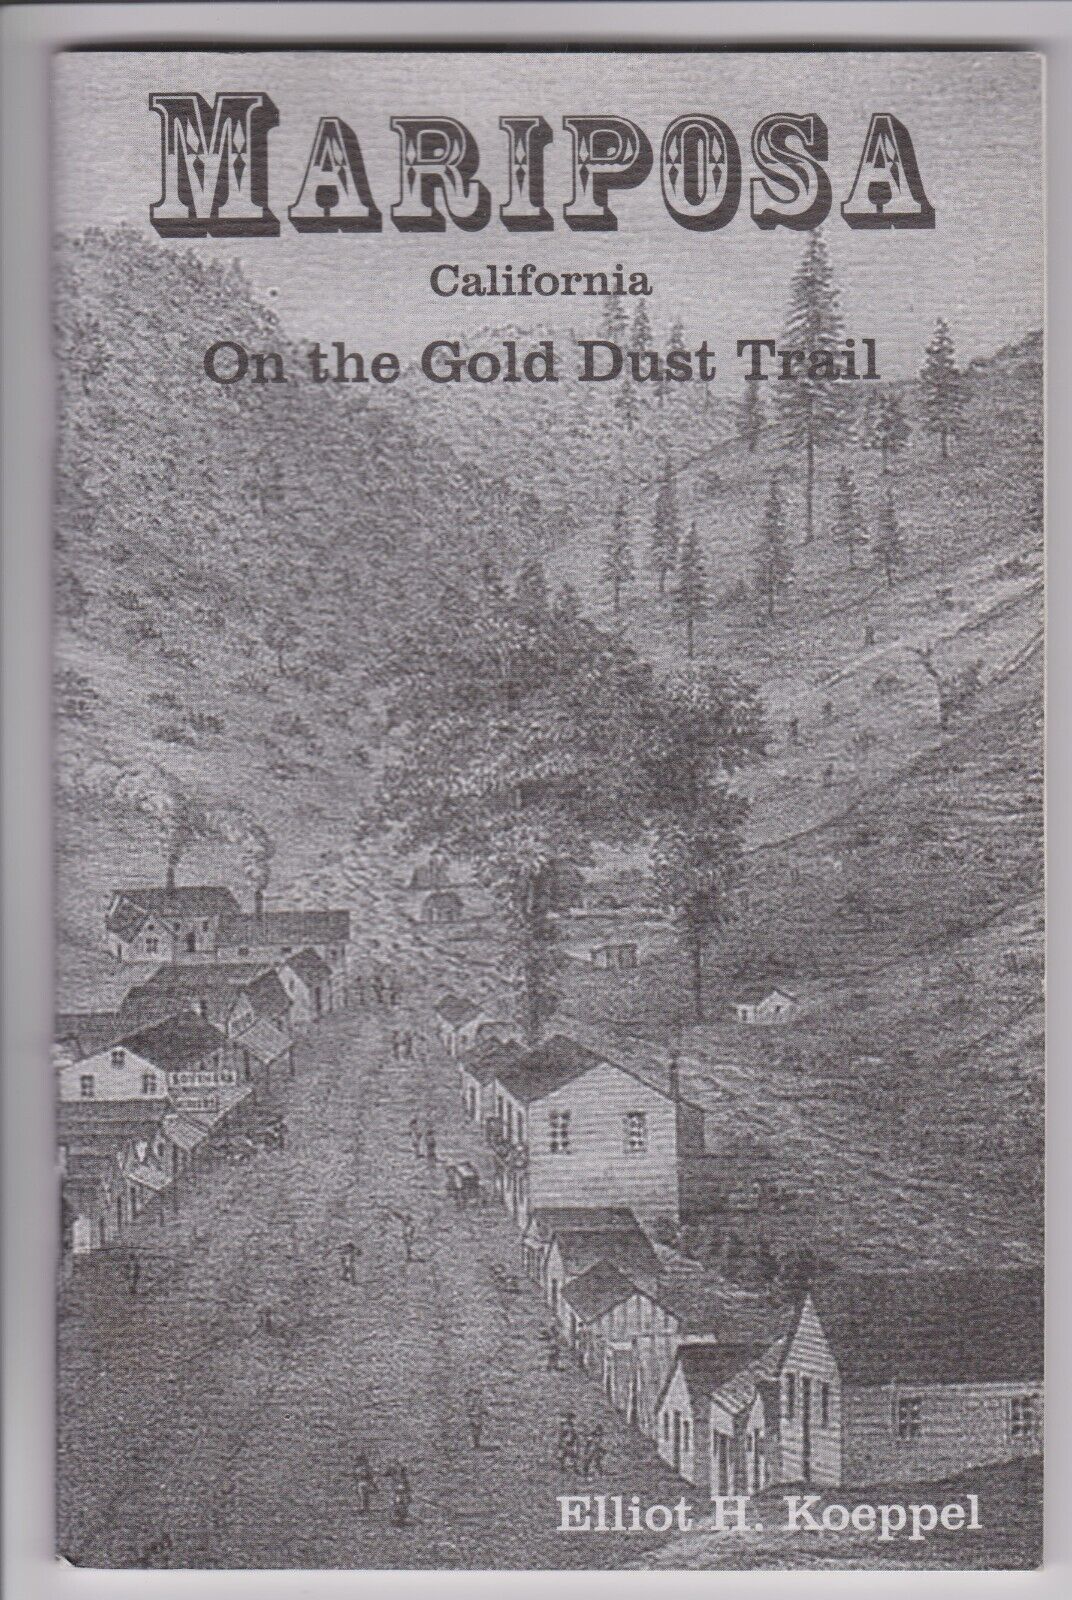 Mariposa California On The Gold Dust Trail Booklet First Printing of 1000 Copies